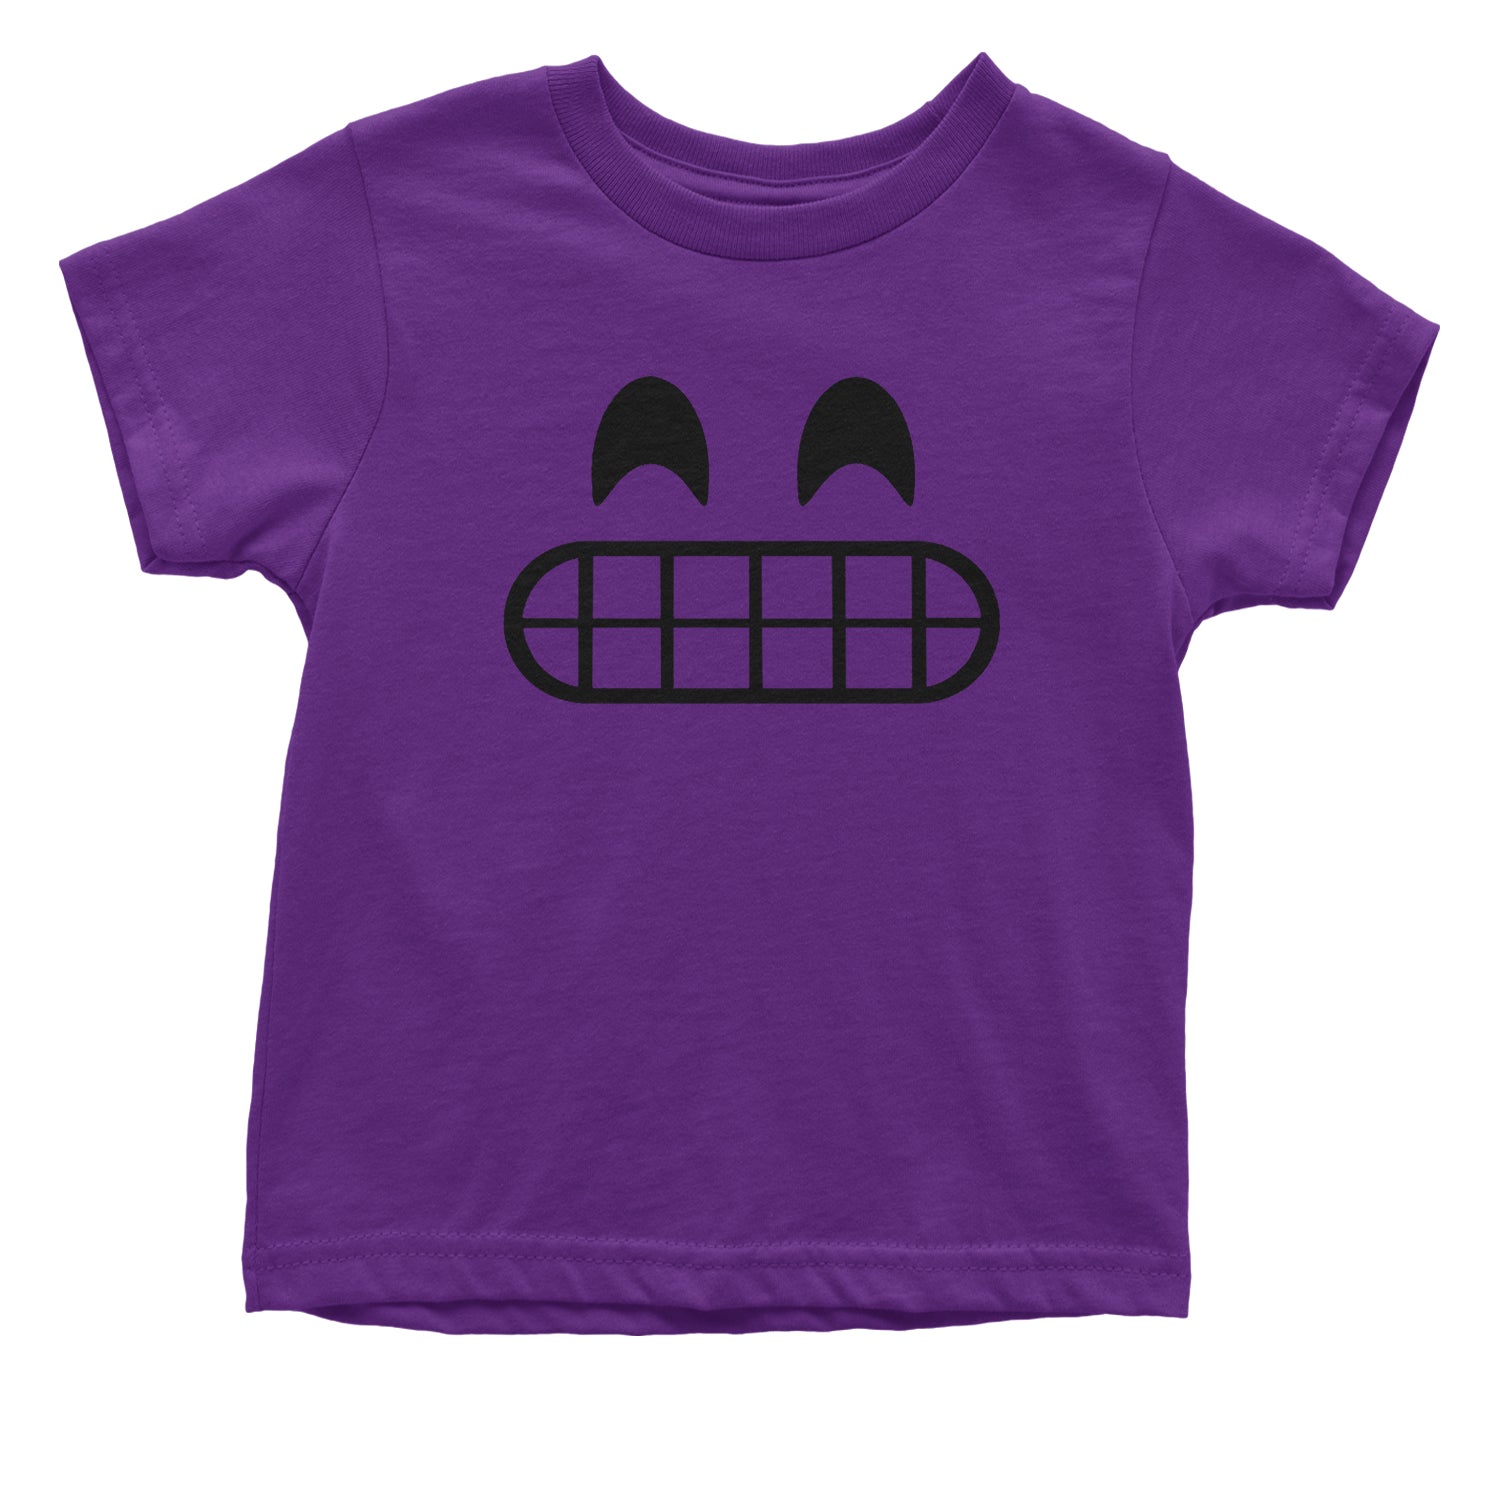 Emoticon Grinning Smile Face Toddler T-Shirt cosplay, costume, dress, emoji, emote, face, halloween, smiley, up, yellow by Expression Tees